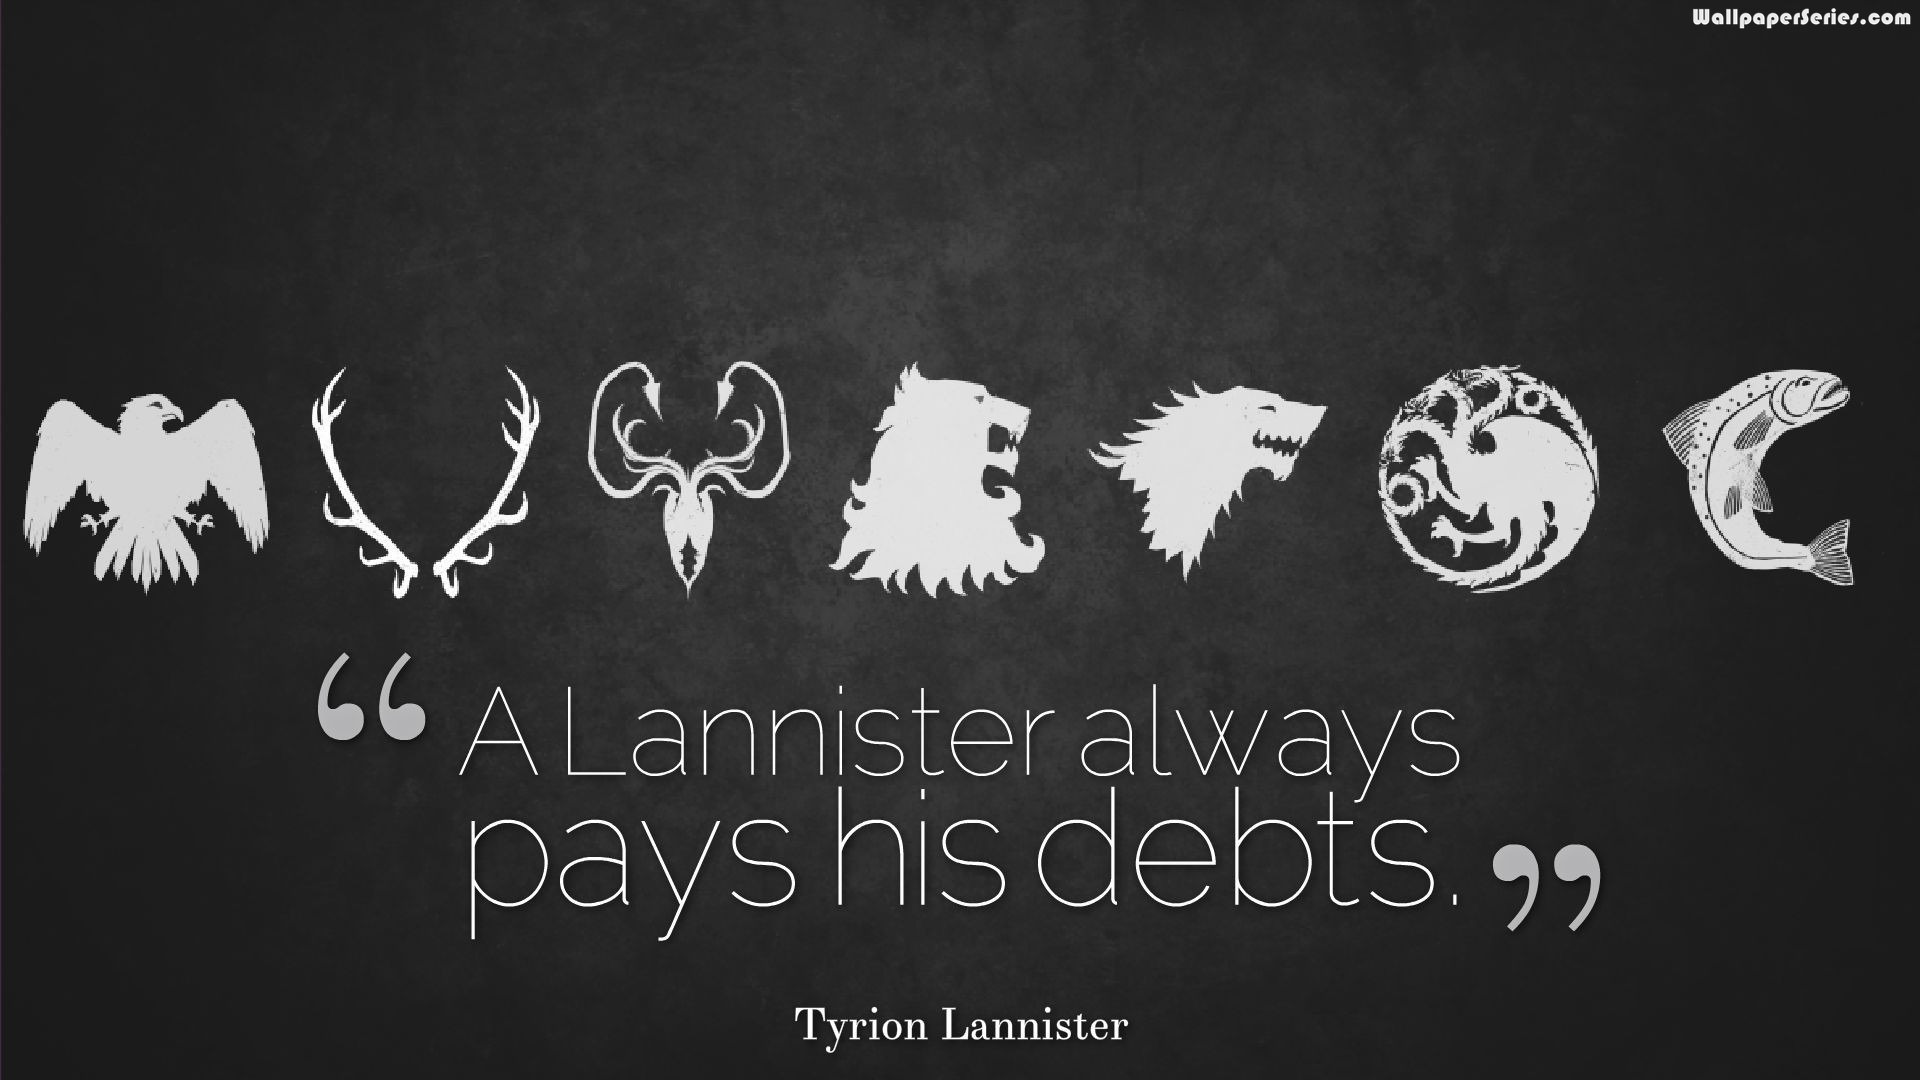 Game Of Thrones Quotes Wallpaper HD Background Image Pics